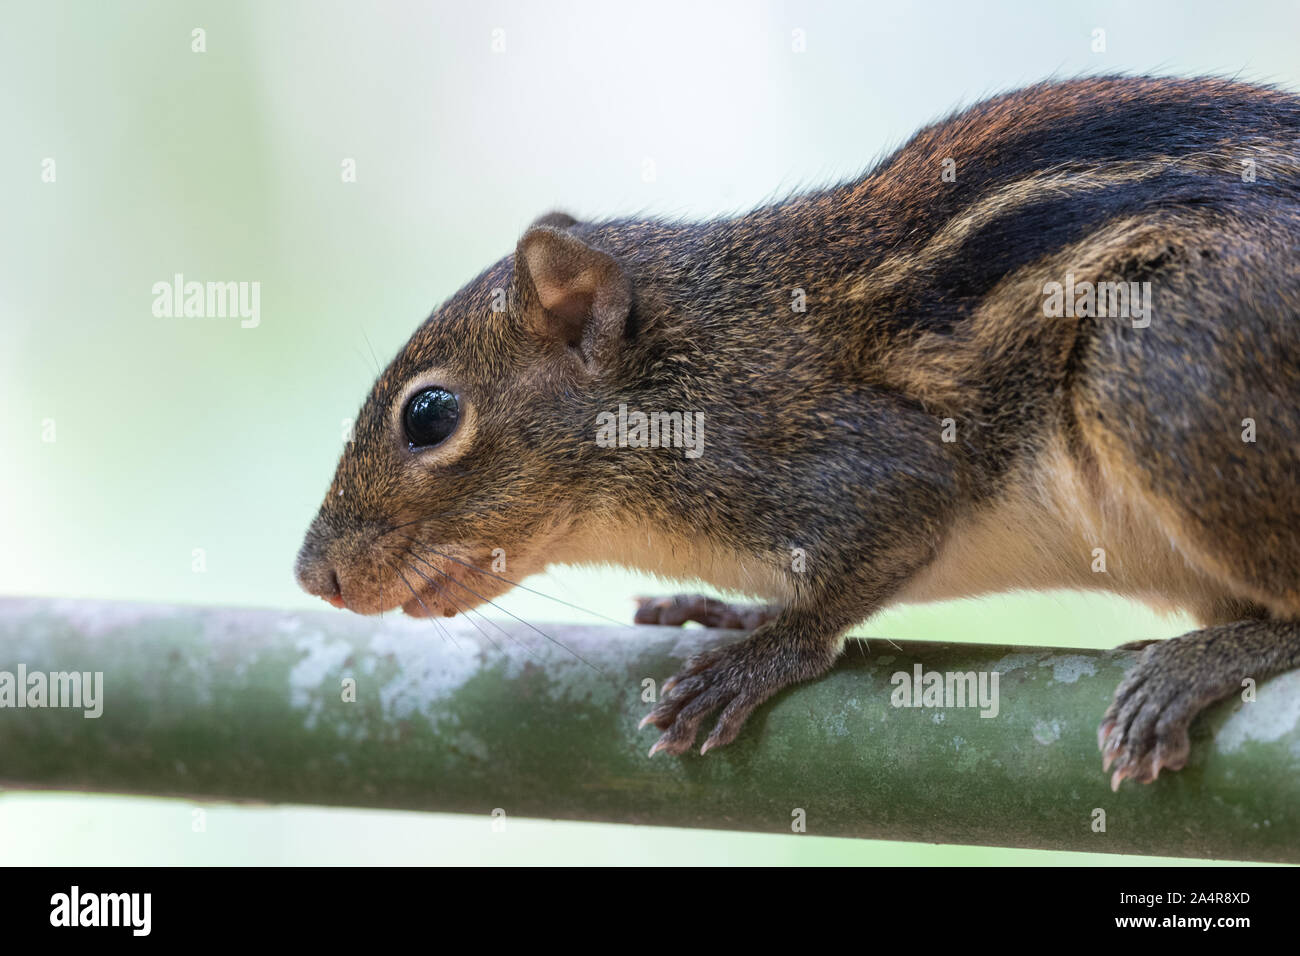 The Berdmore's ground squirrel (Menetes berdmorei) or Indochinese ground squirrel is found in Southeast Asia, from the east of Myanmar to Vietnam. Stock Photo